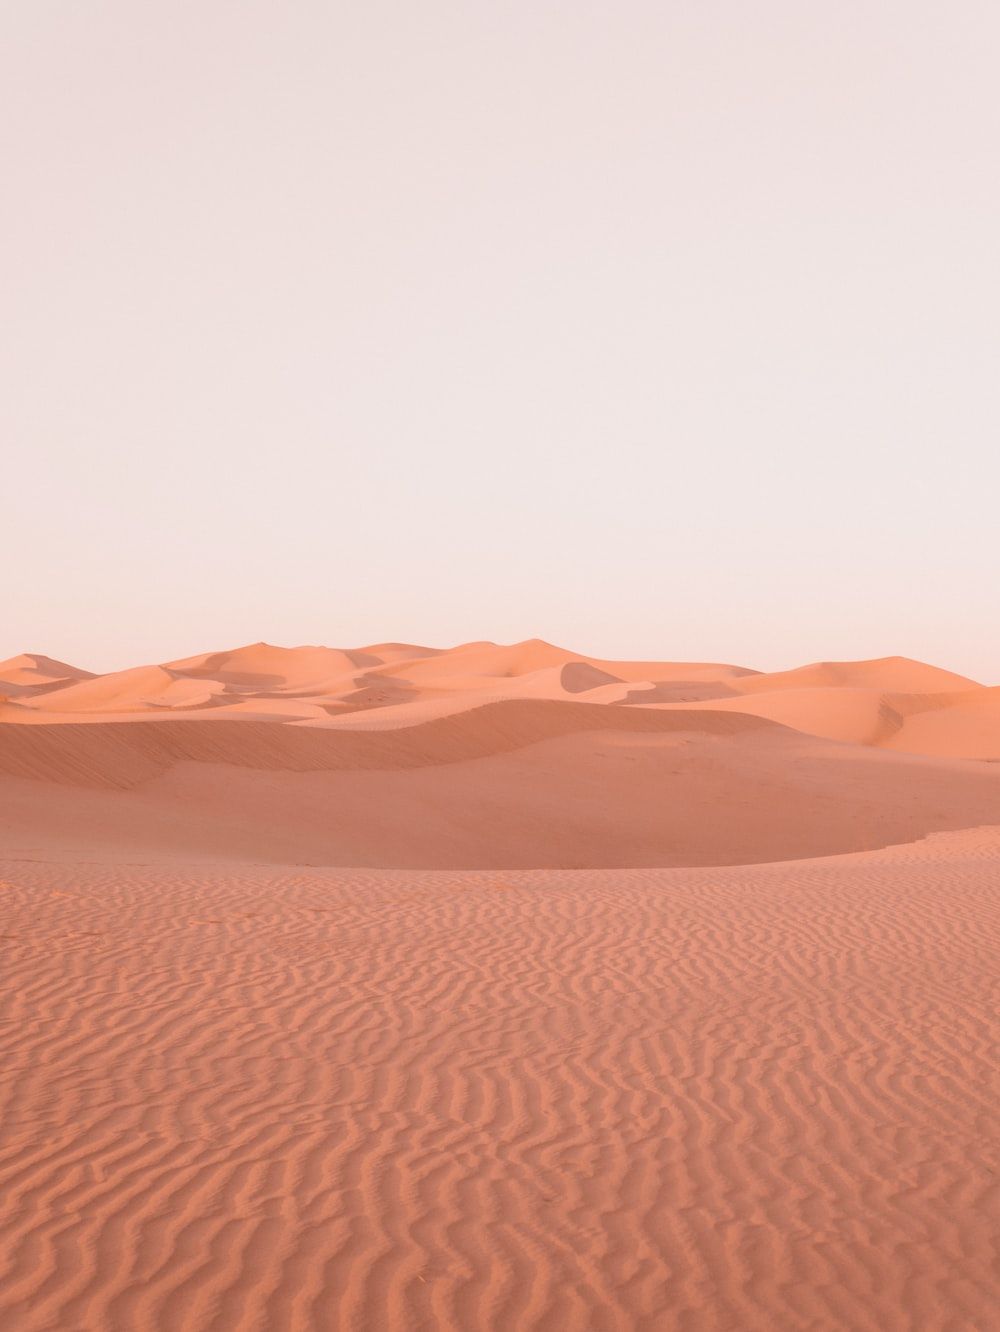 Pink Desert Picture. Download Free Image